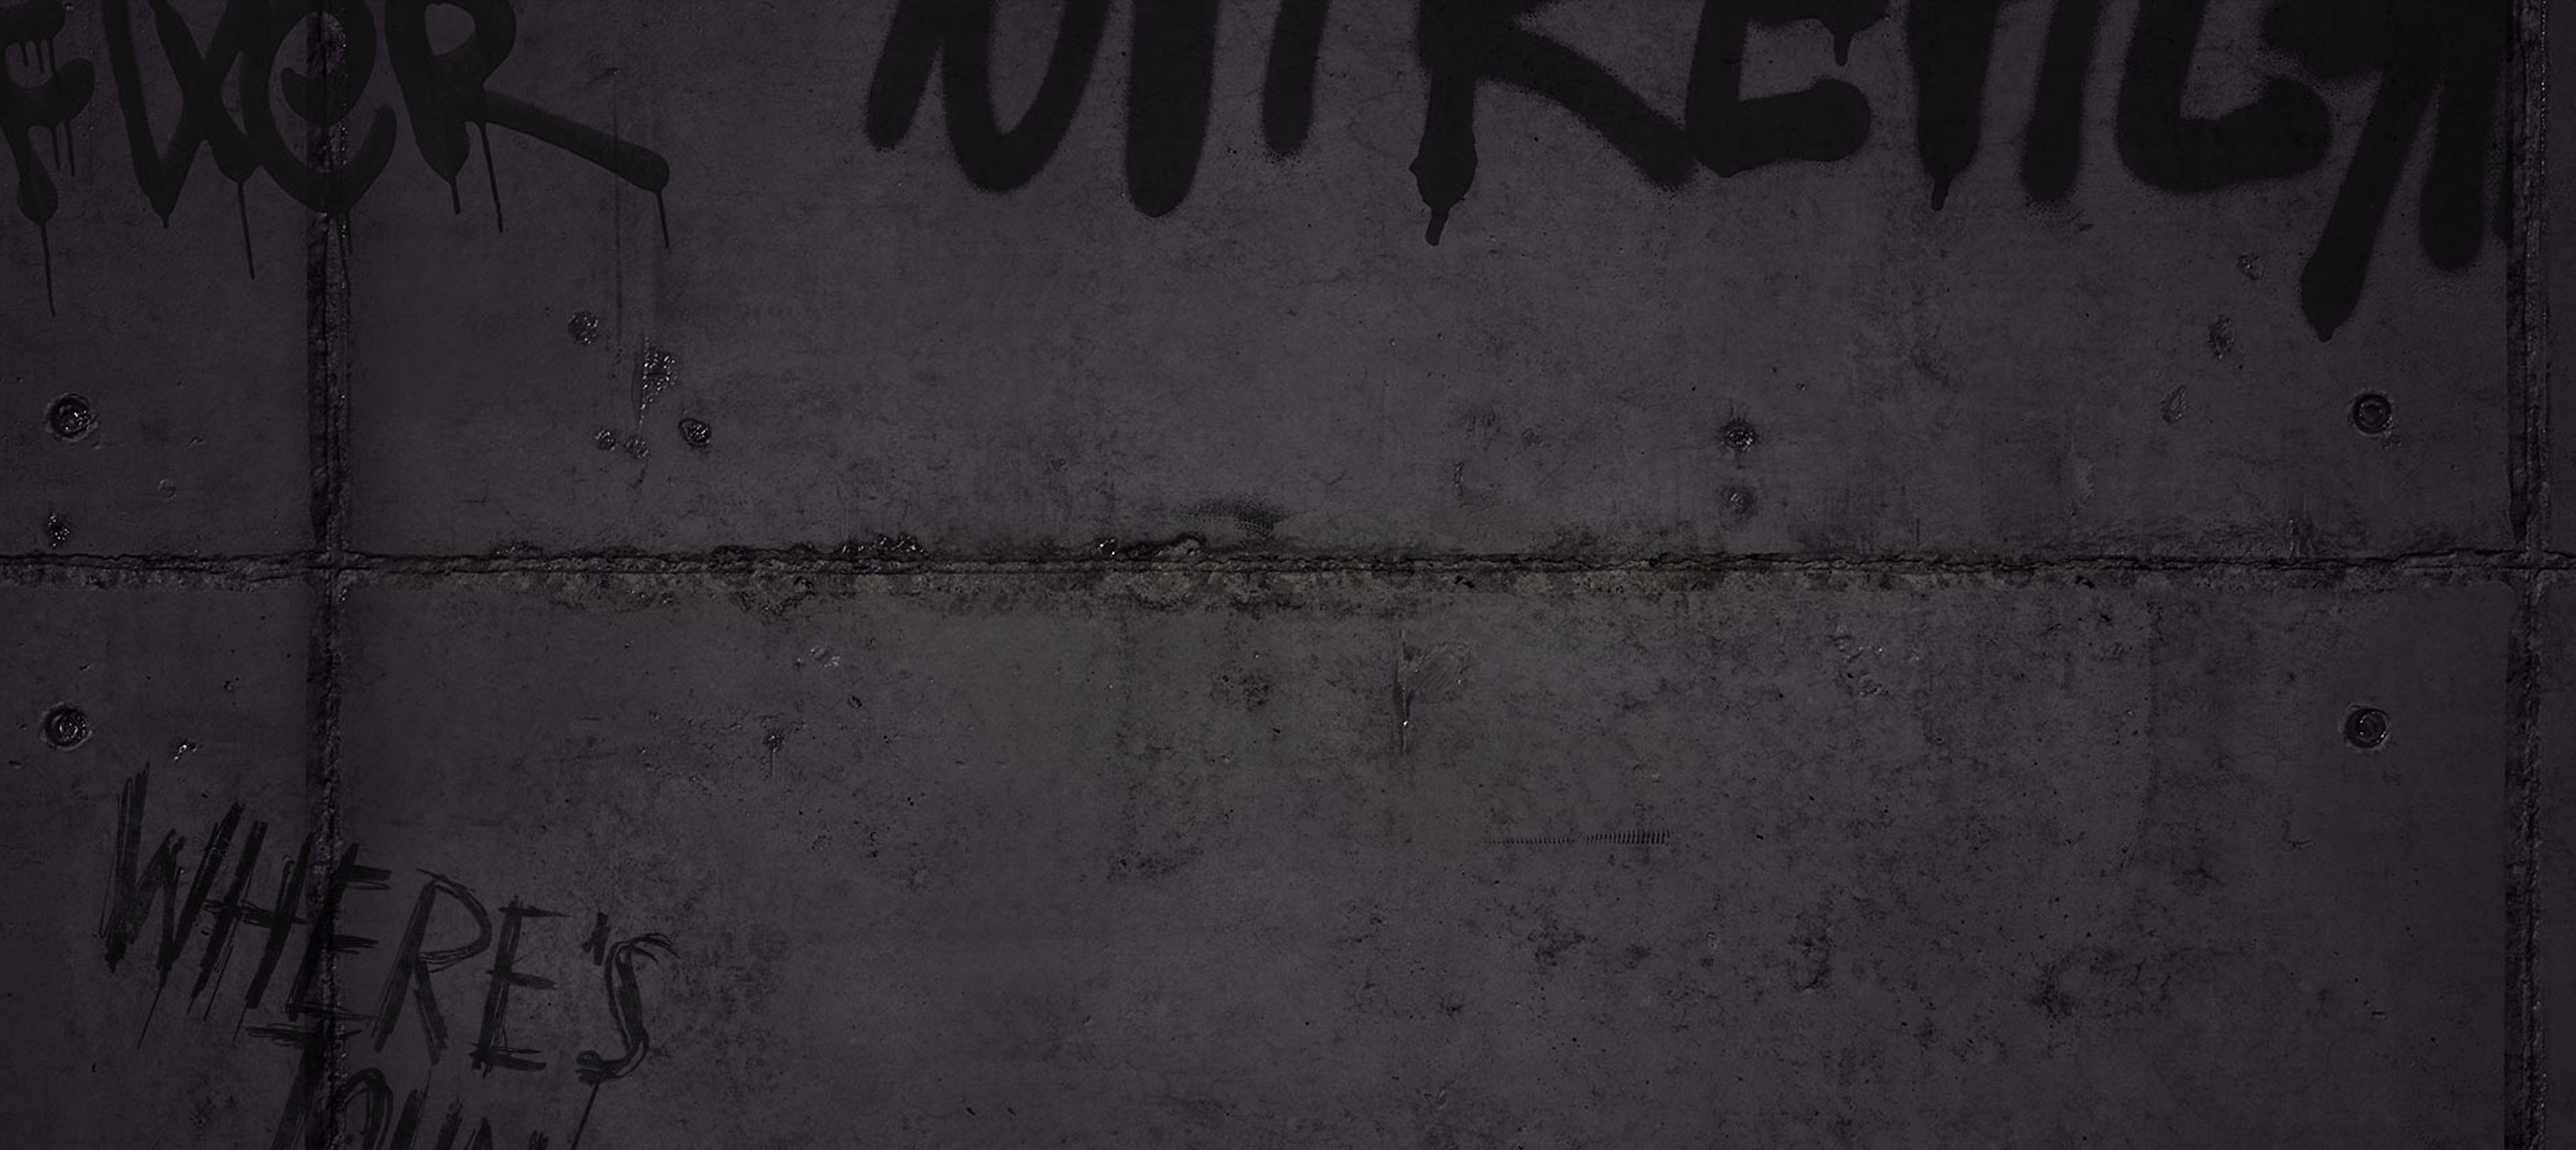 Background texture - dark tiled wall with graffiti